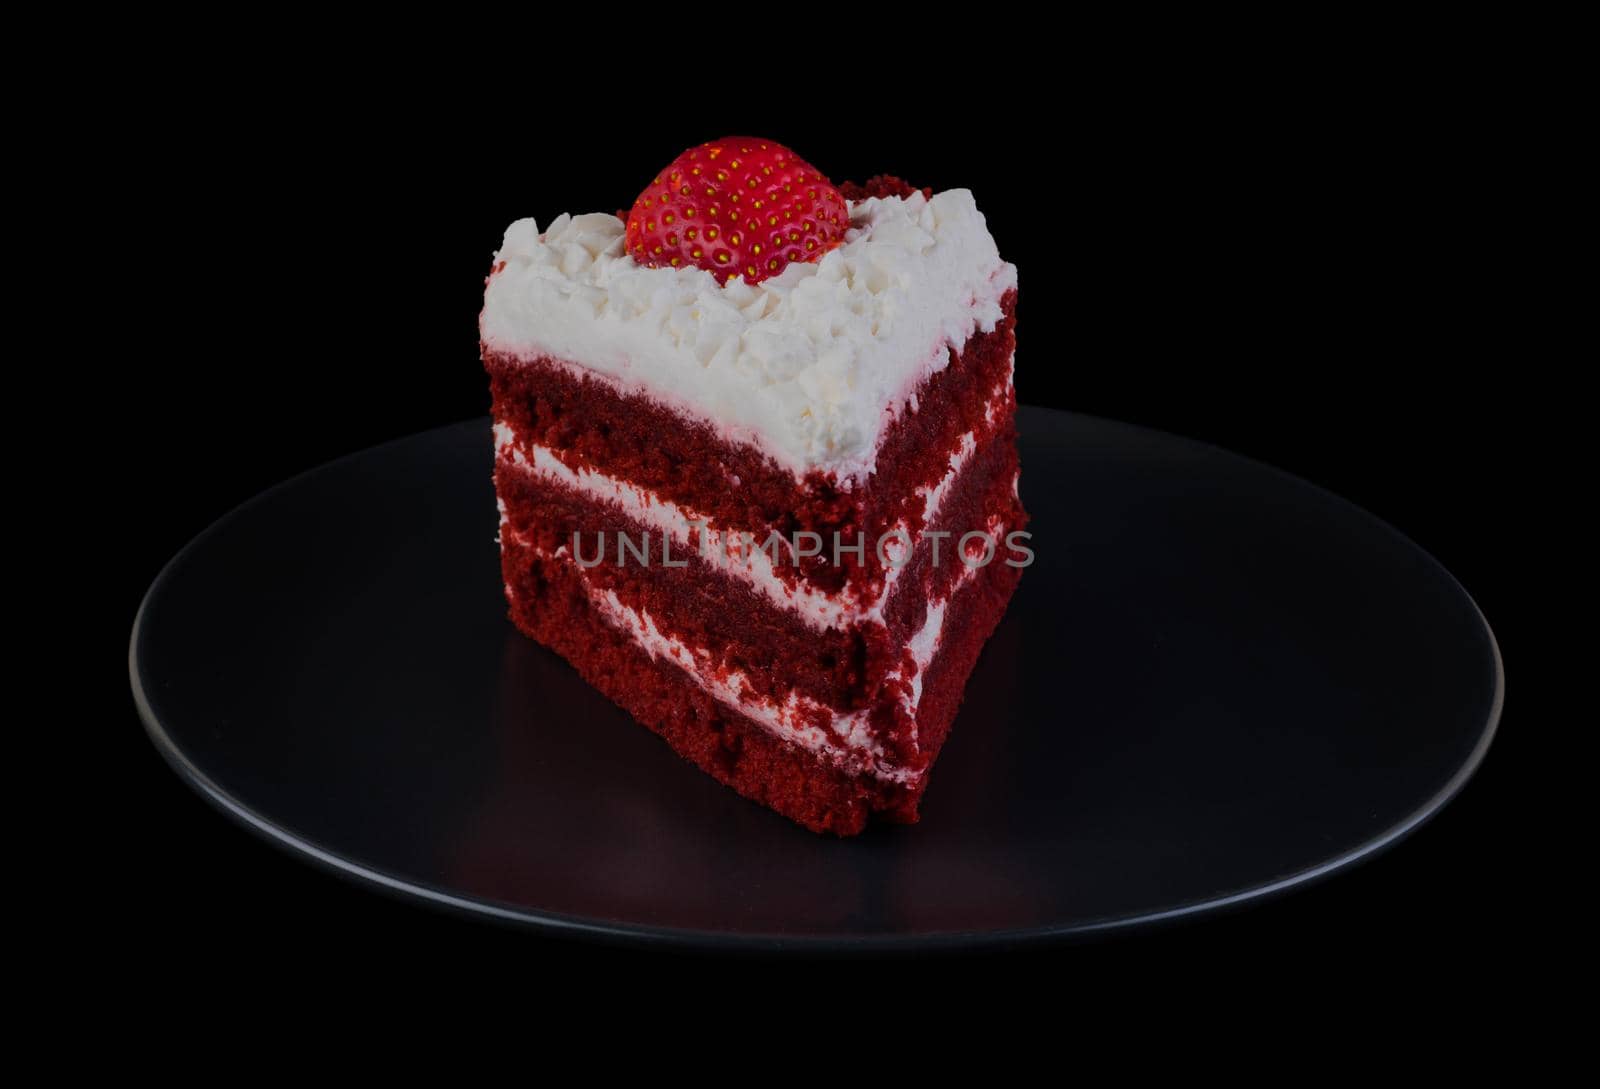 Piece of cake covered with protein cream and strawberries on a black plate and black background